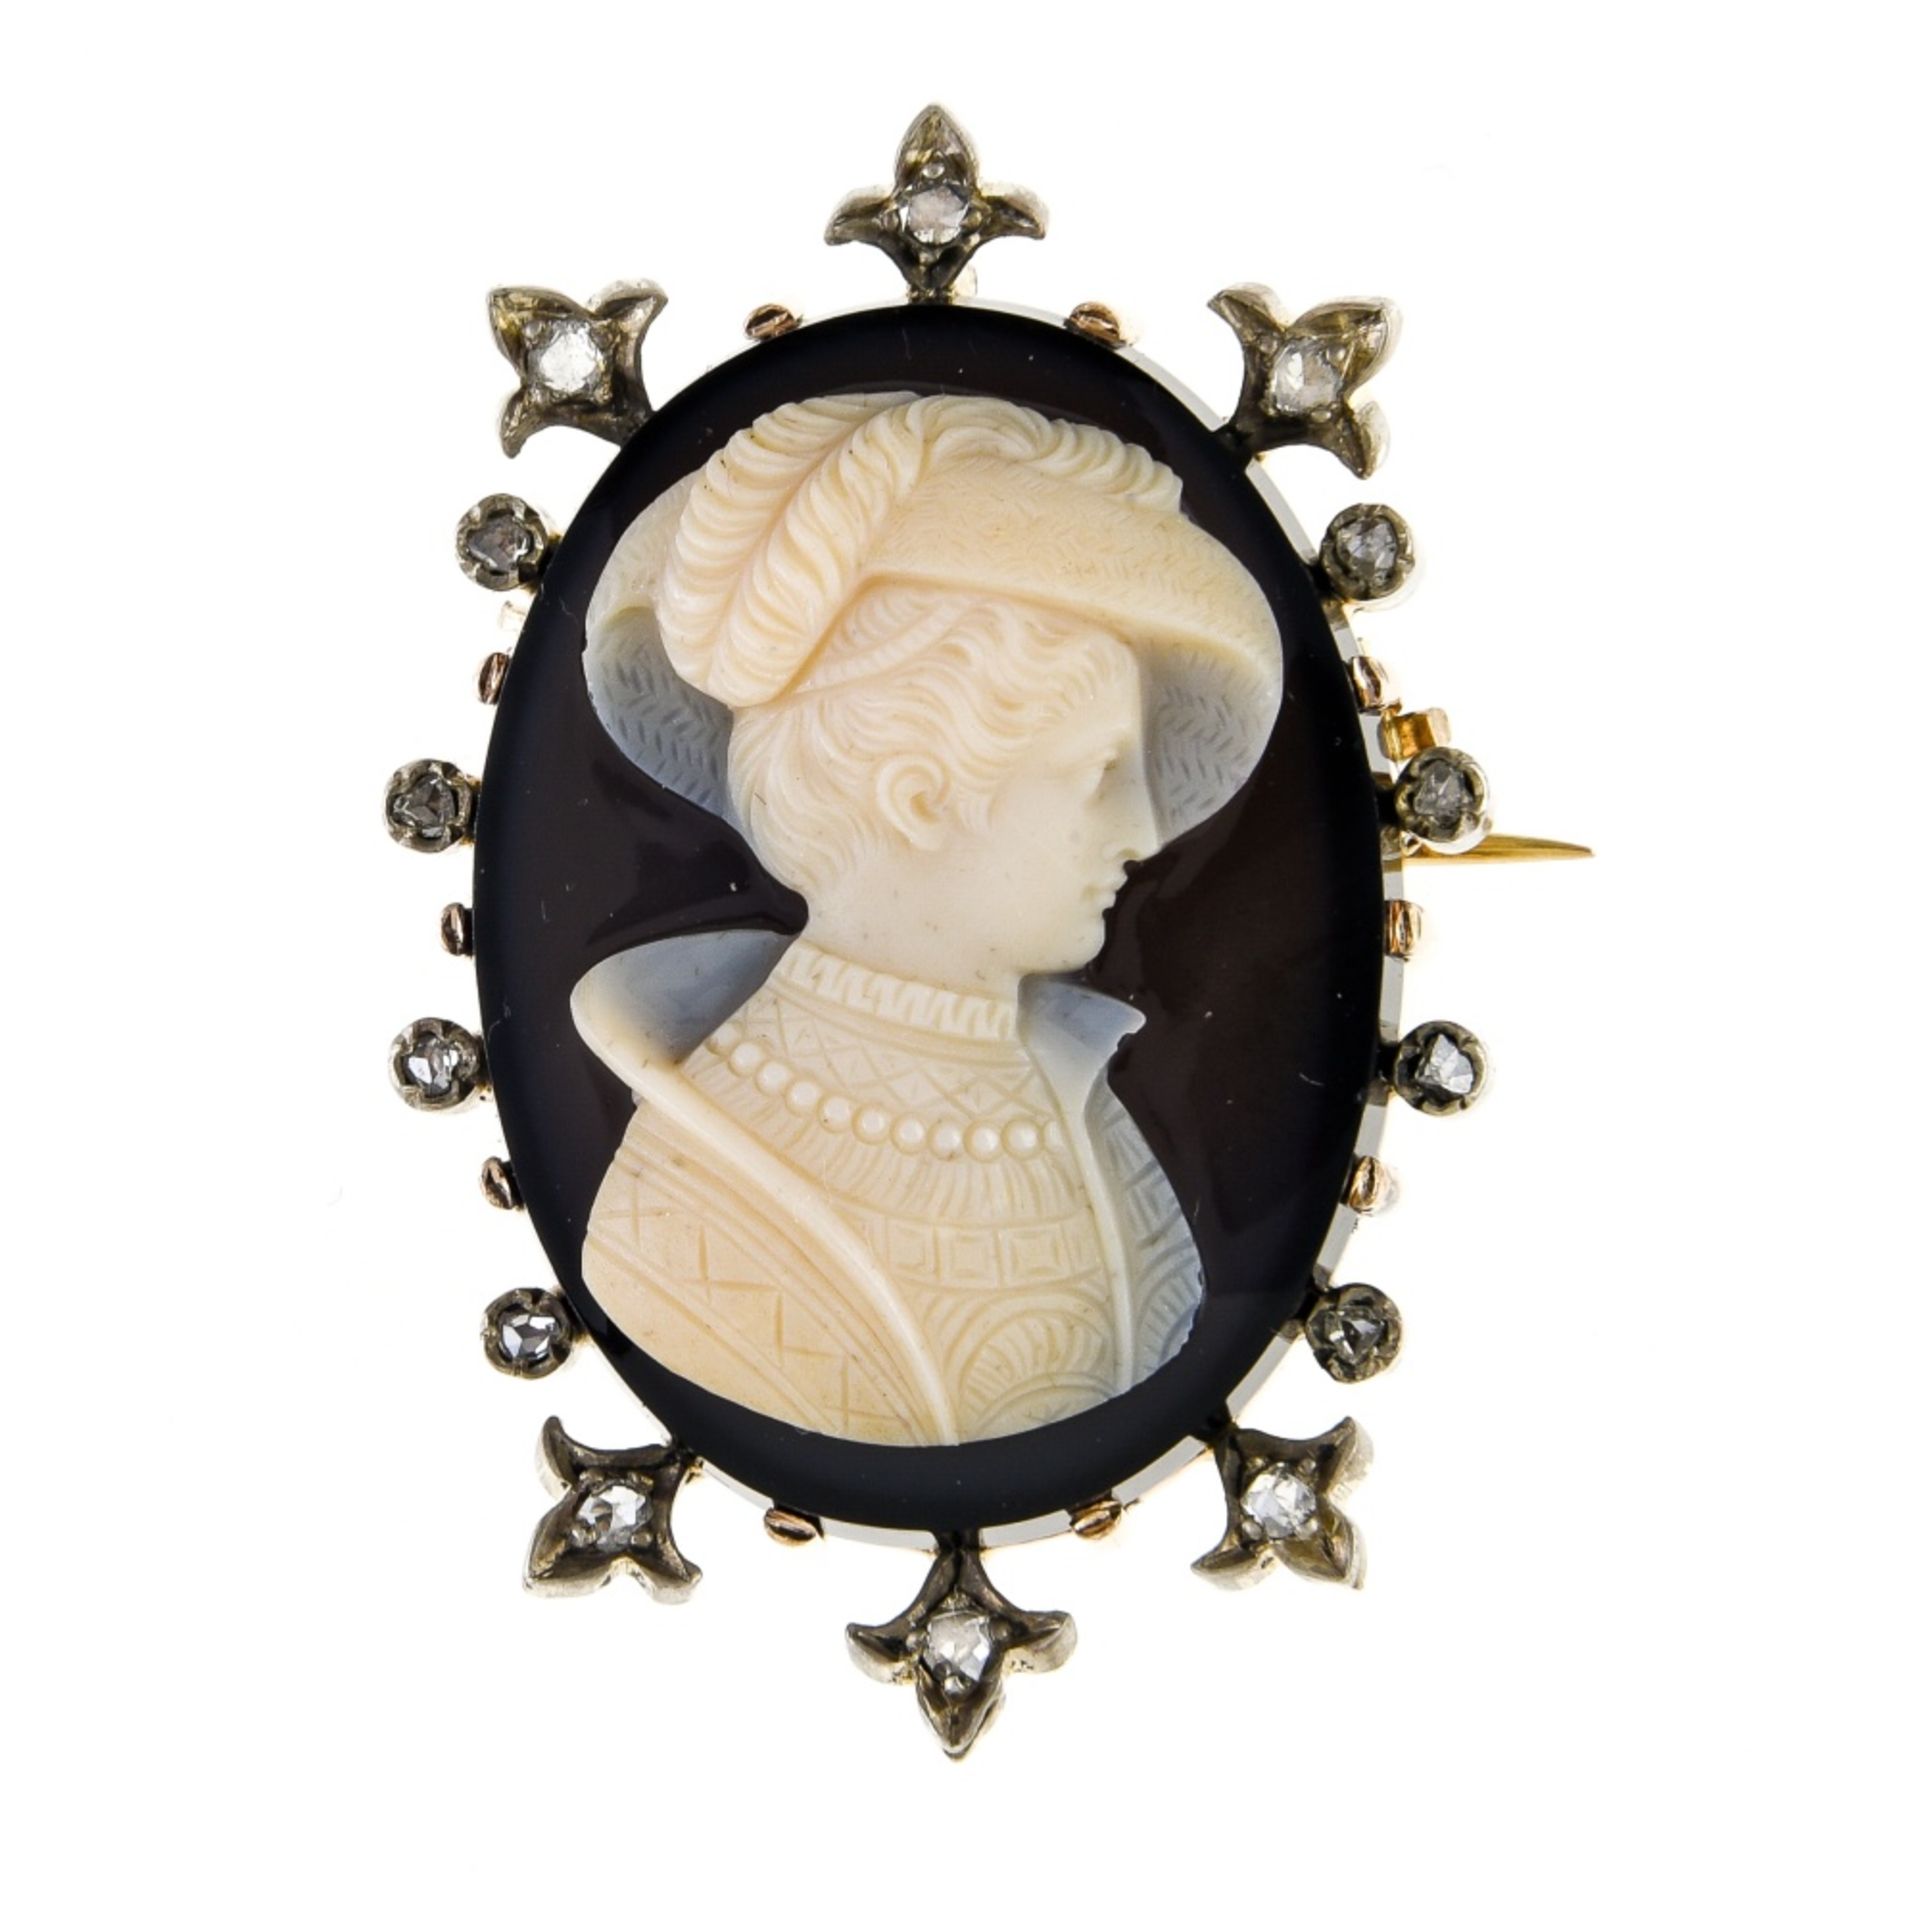 Napoleon III cameo brooch/pendant 18 kt yellow gold and silver, set with a black and white oval